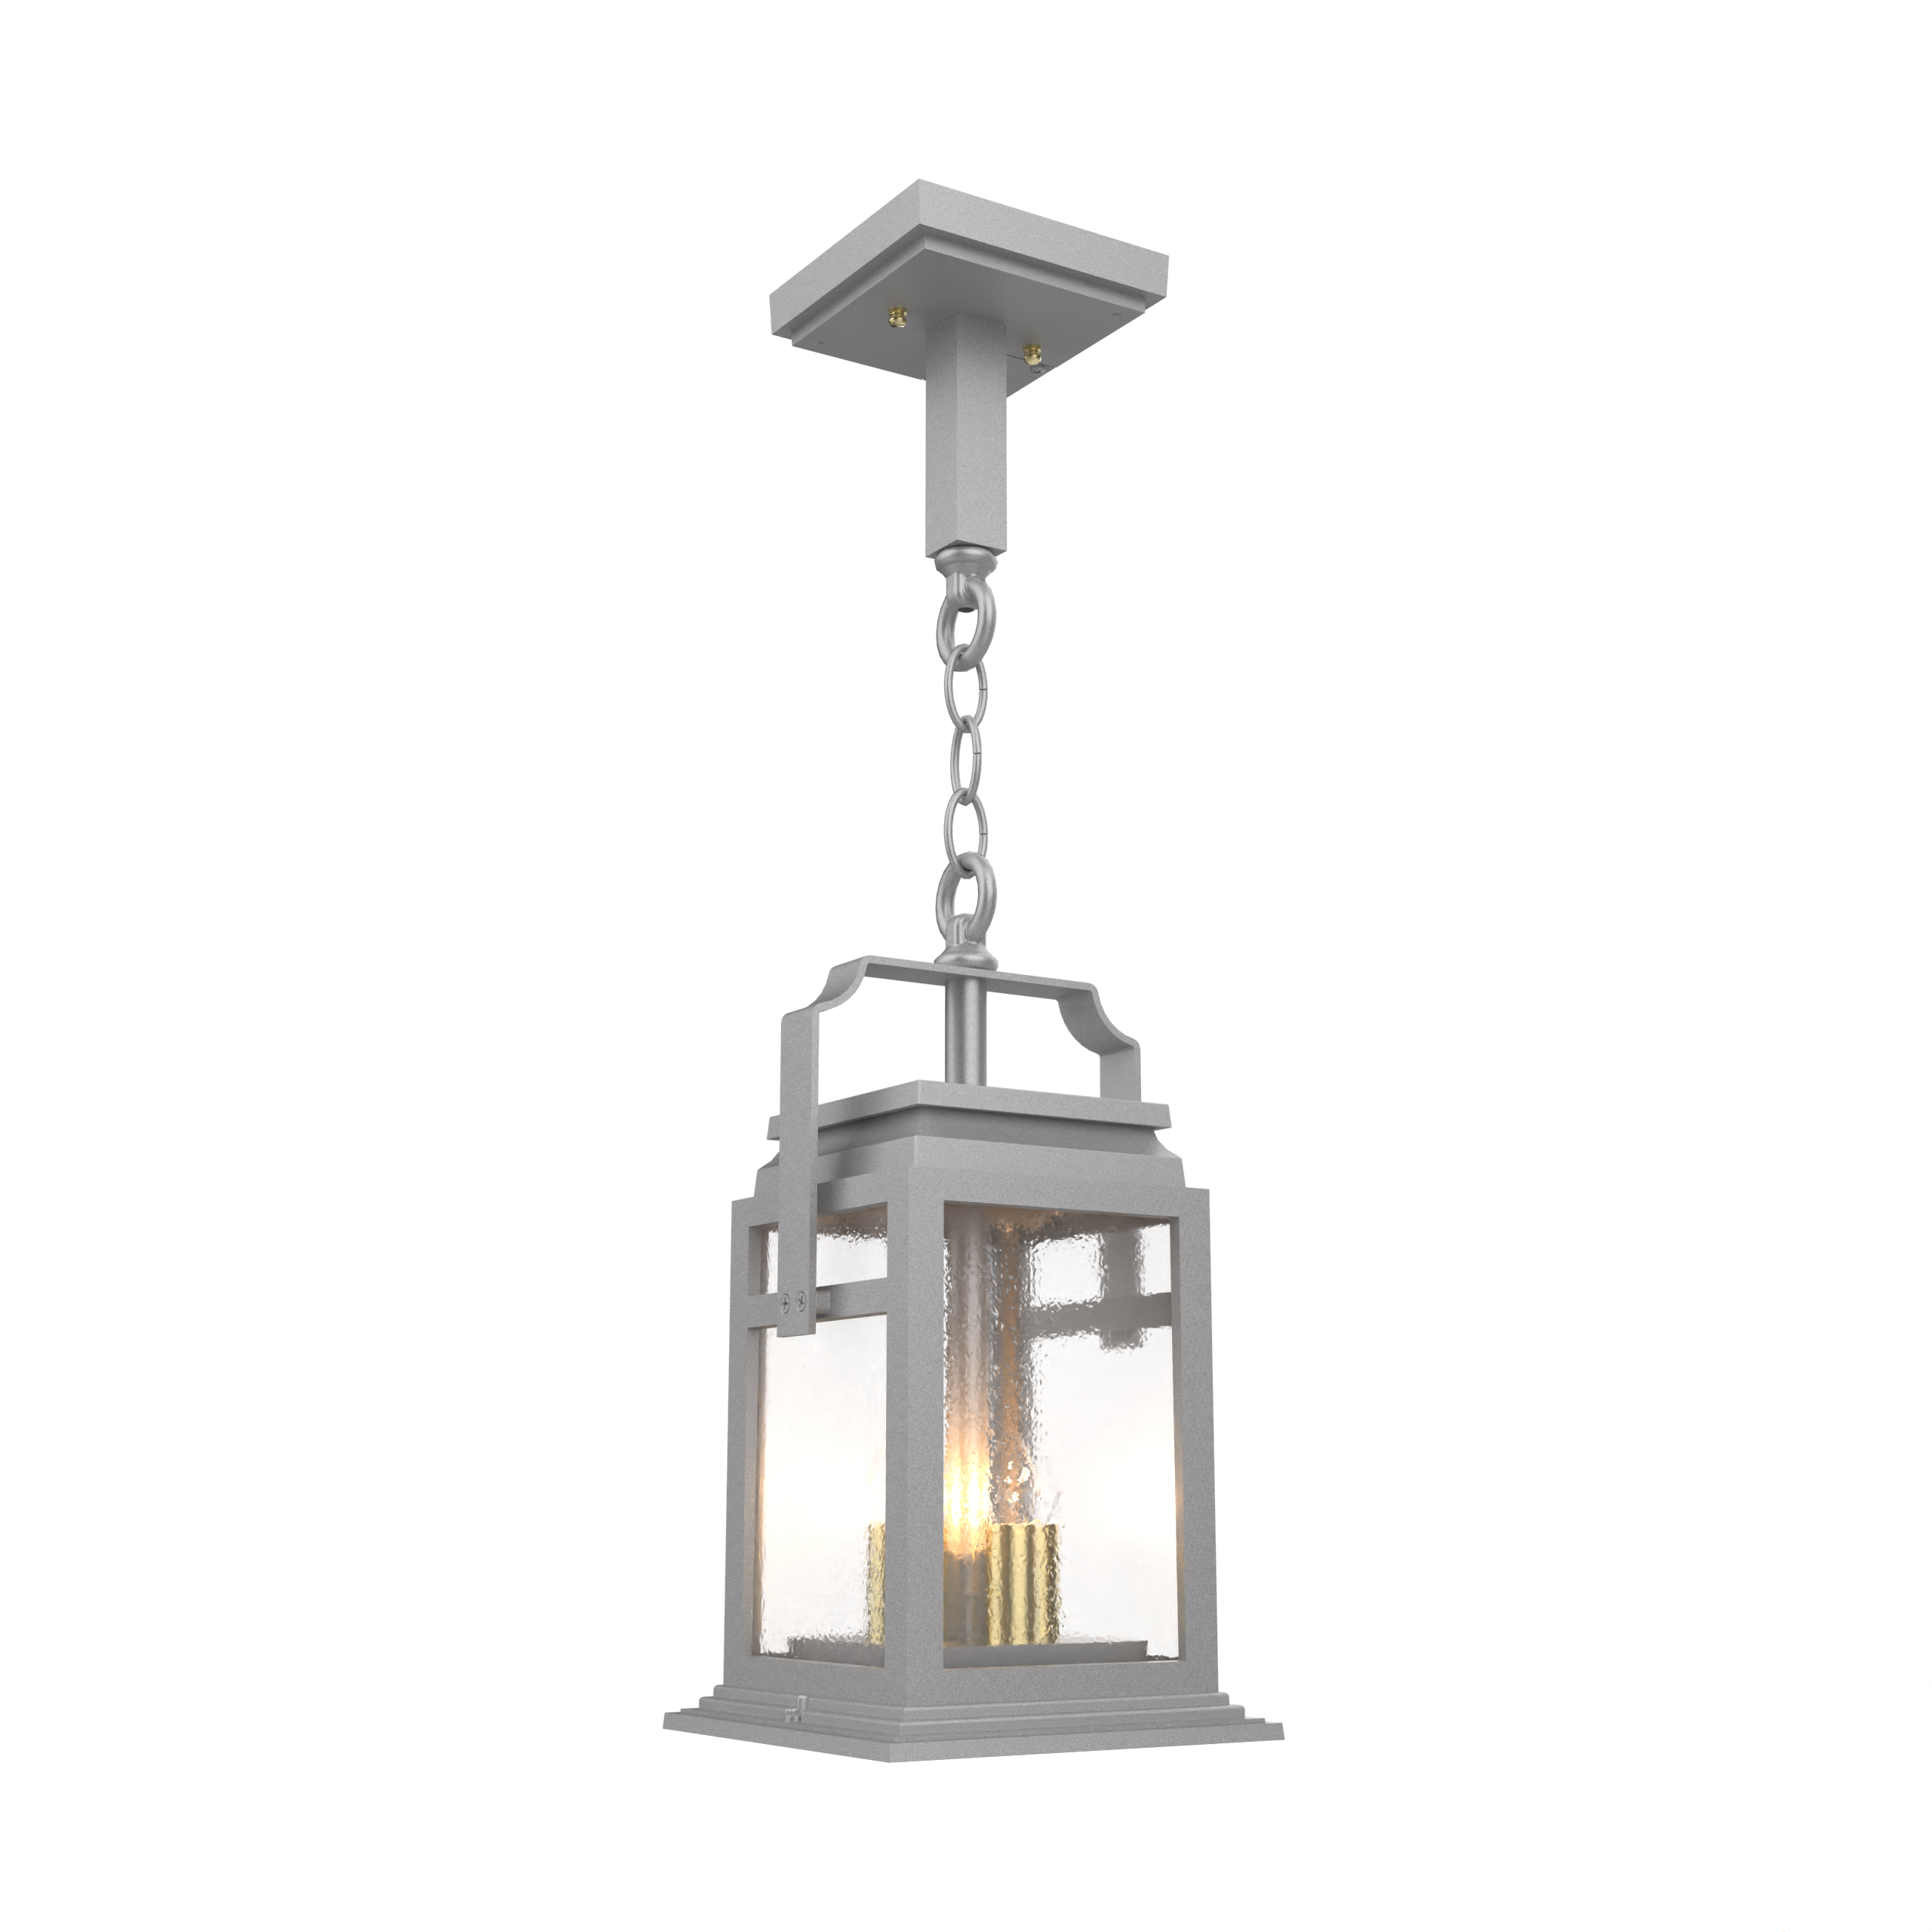 Serie 65e - Ceiling mount on chain small format - 16550